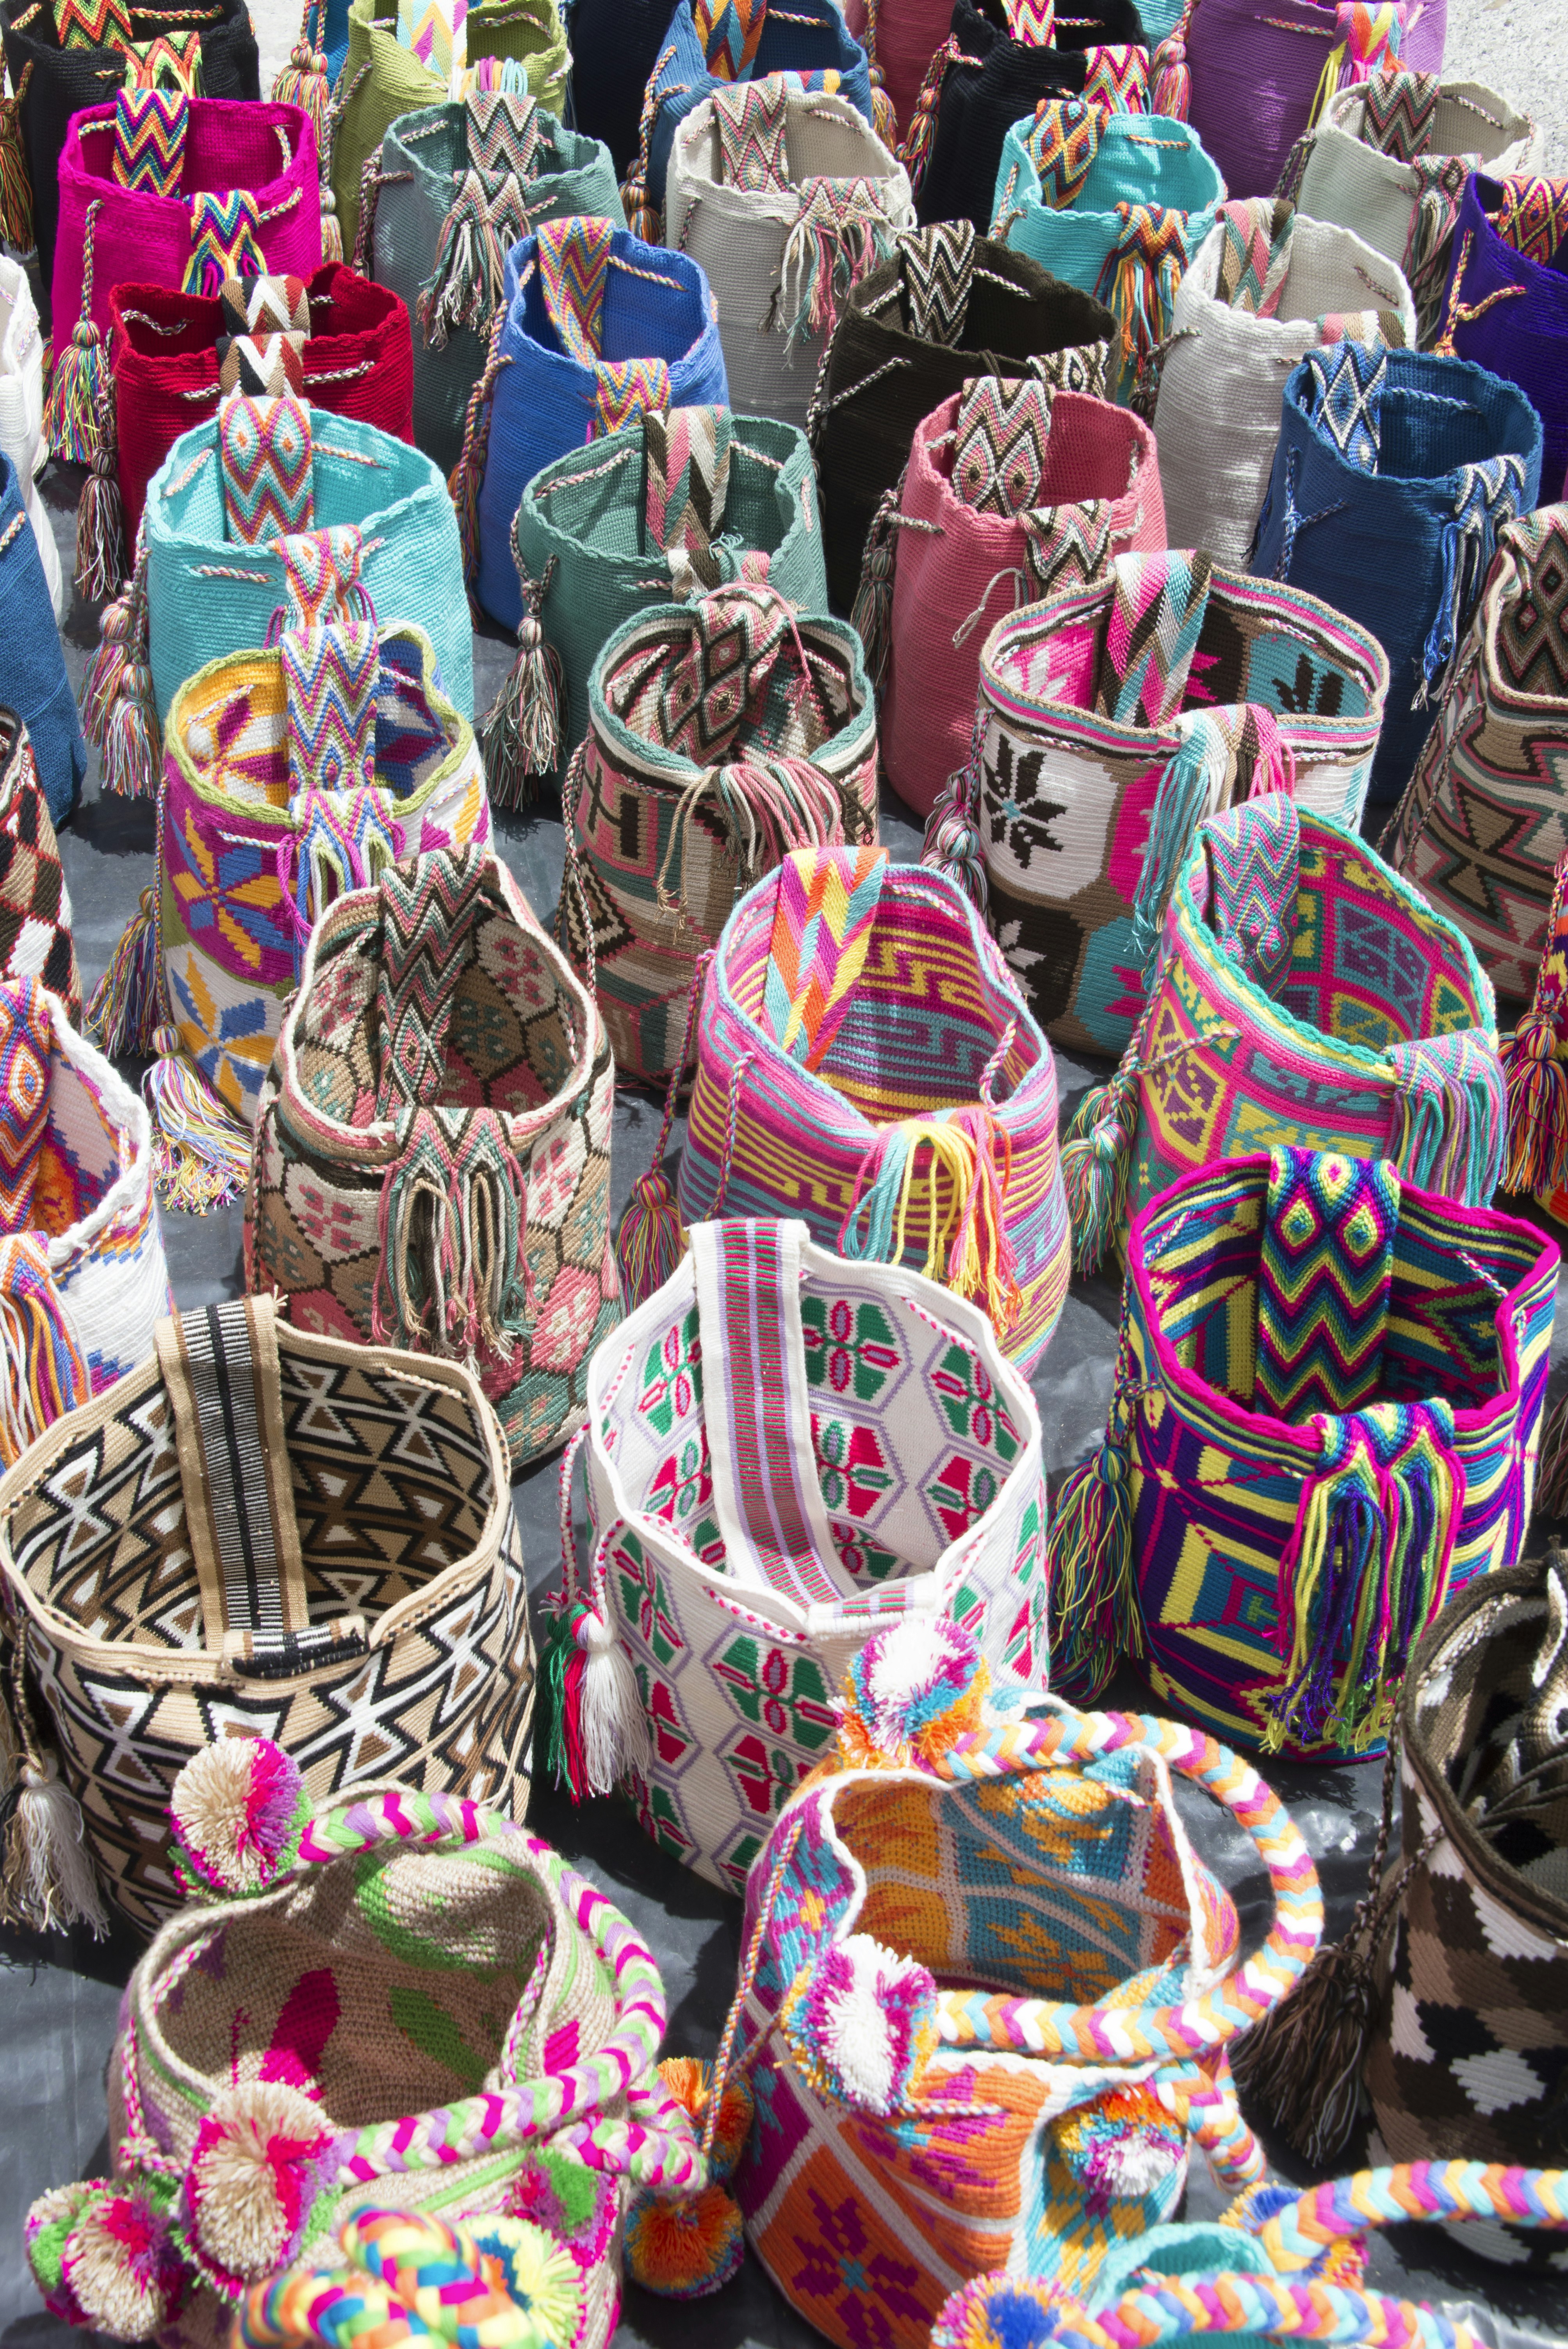 A display of many brightly colored bags, woven by the Wayúu indigenous people; each bag has its own unique geometric pattern.